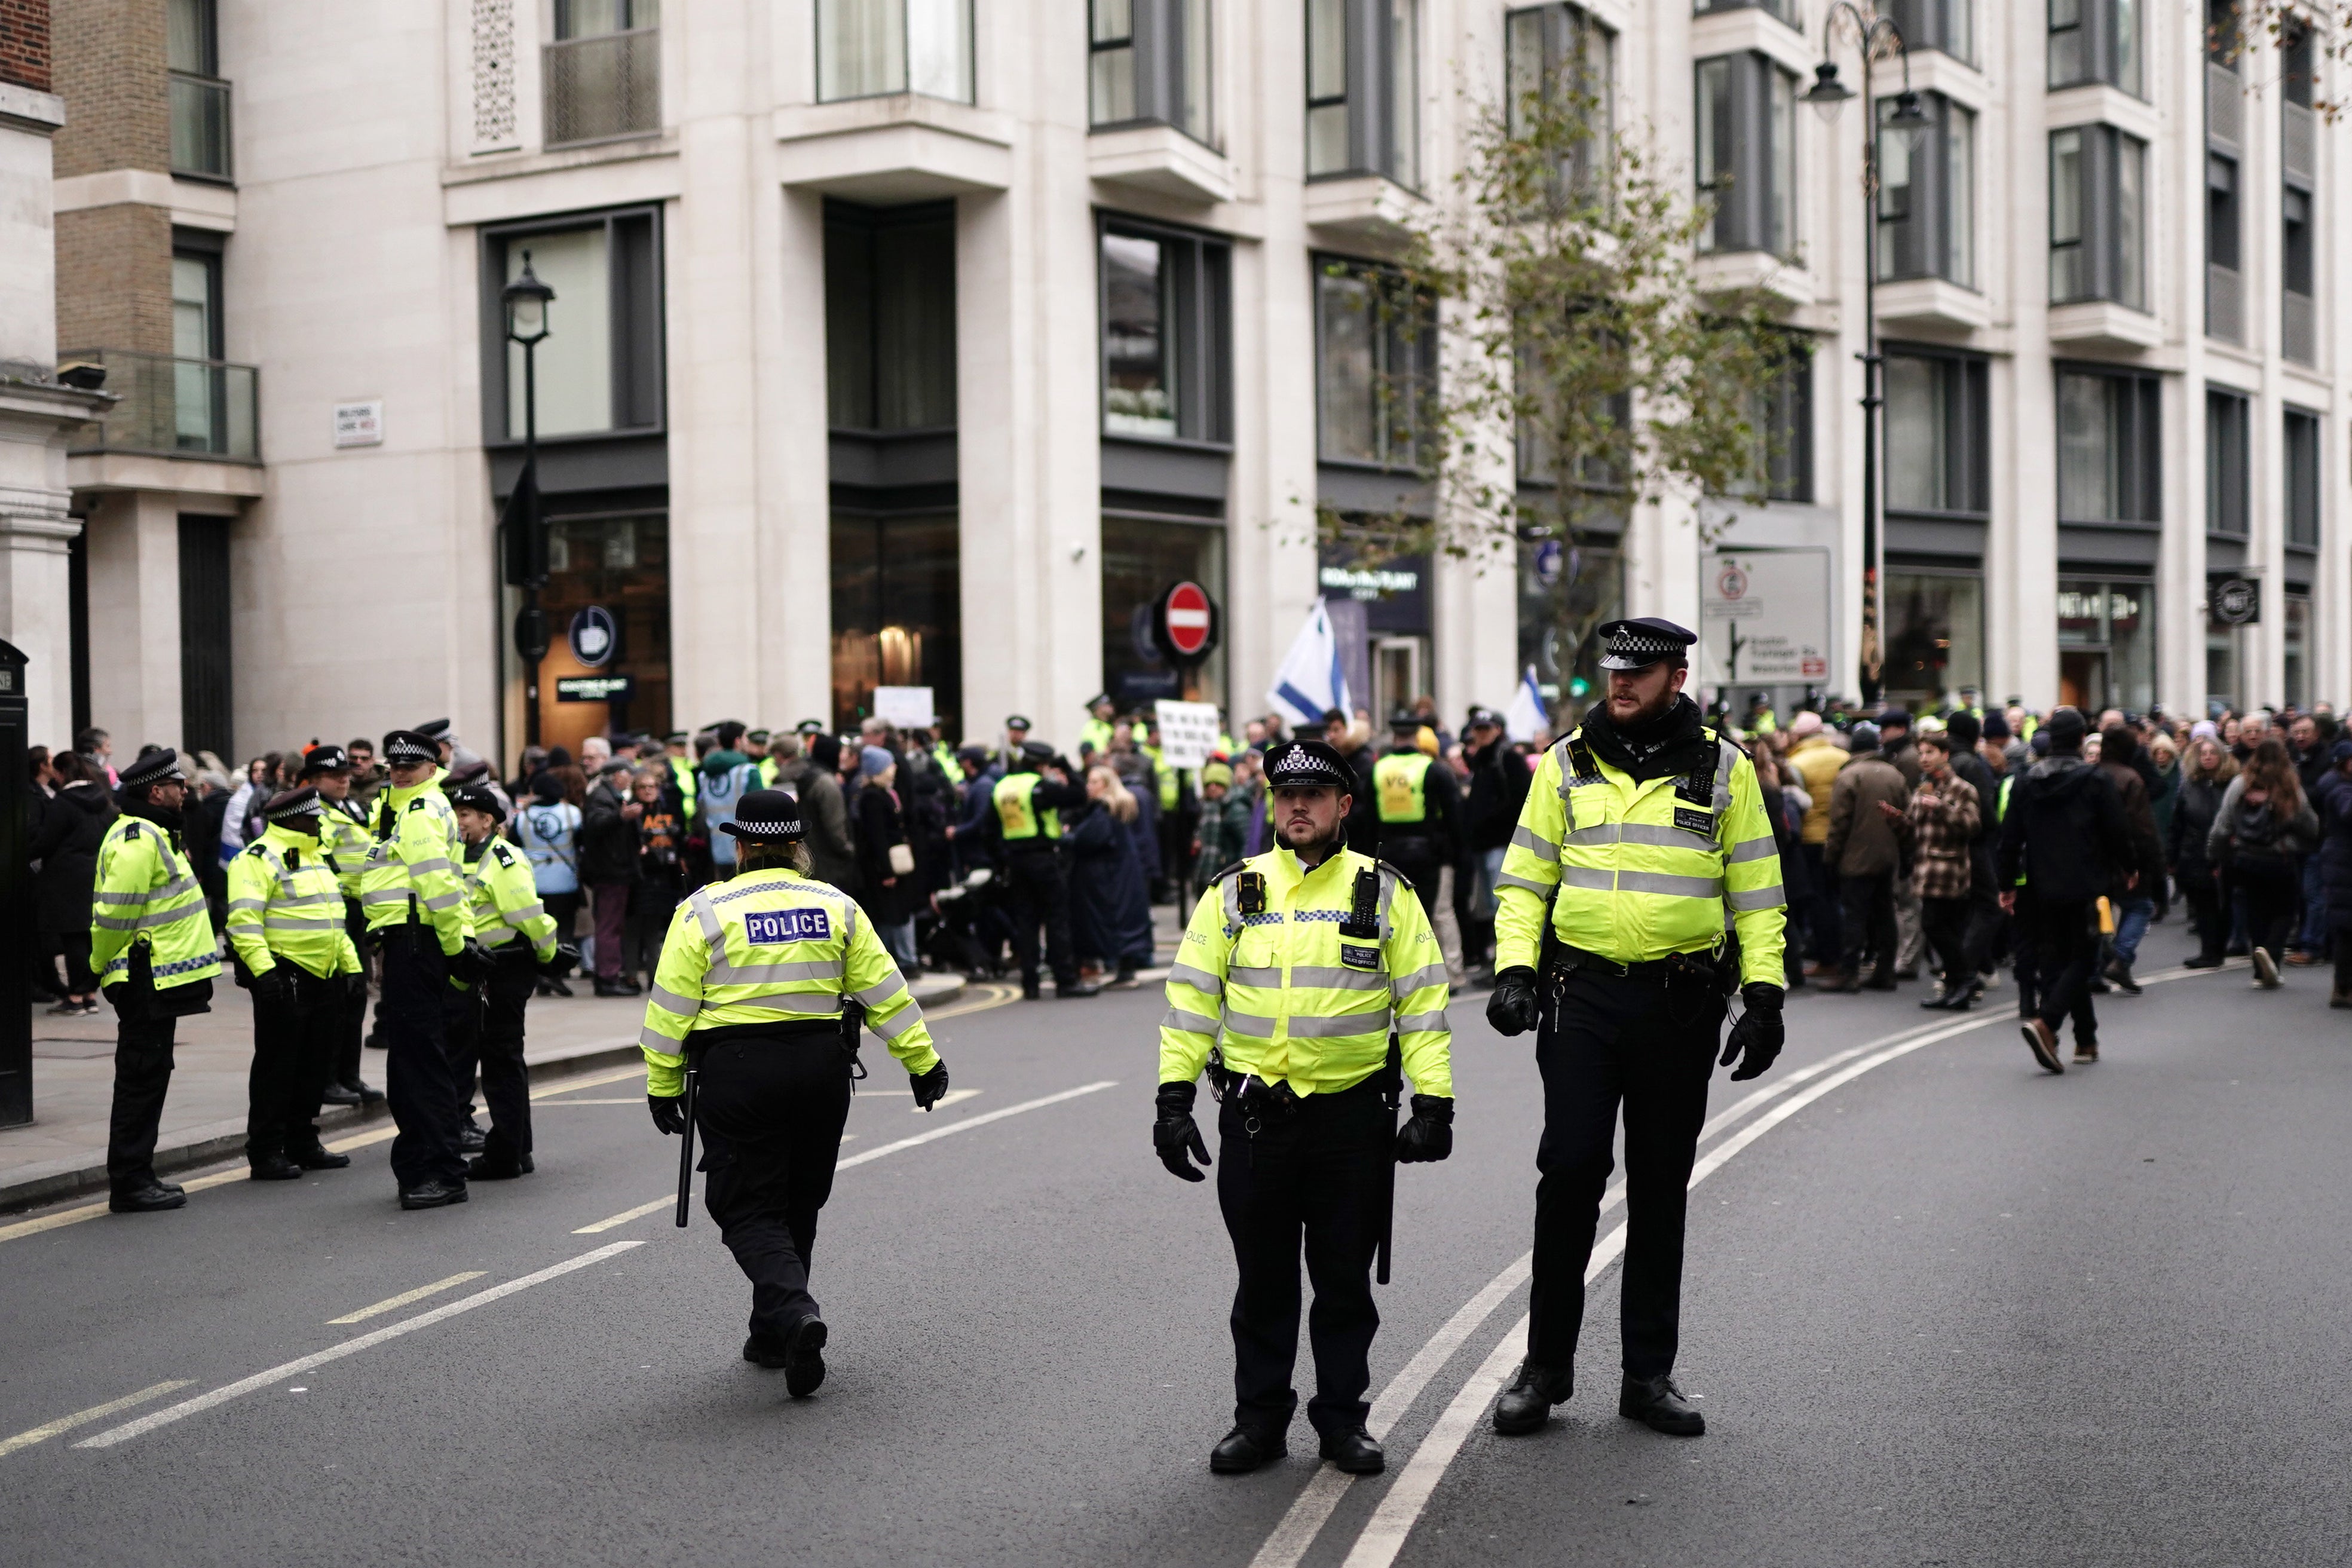 Police officers in attendance as people take part in a march against antisemitism organised by the volunteer-led charity Campaign Against Antisemitism at the Royal Courts of Justice in London